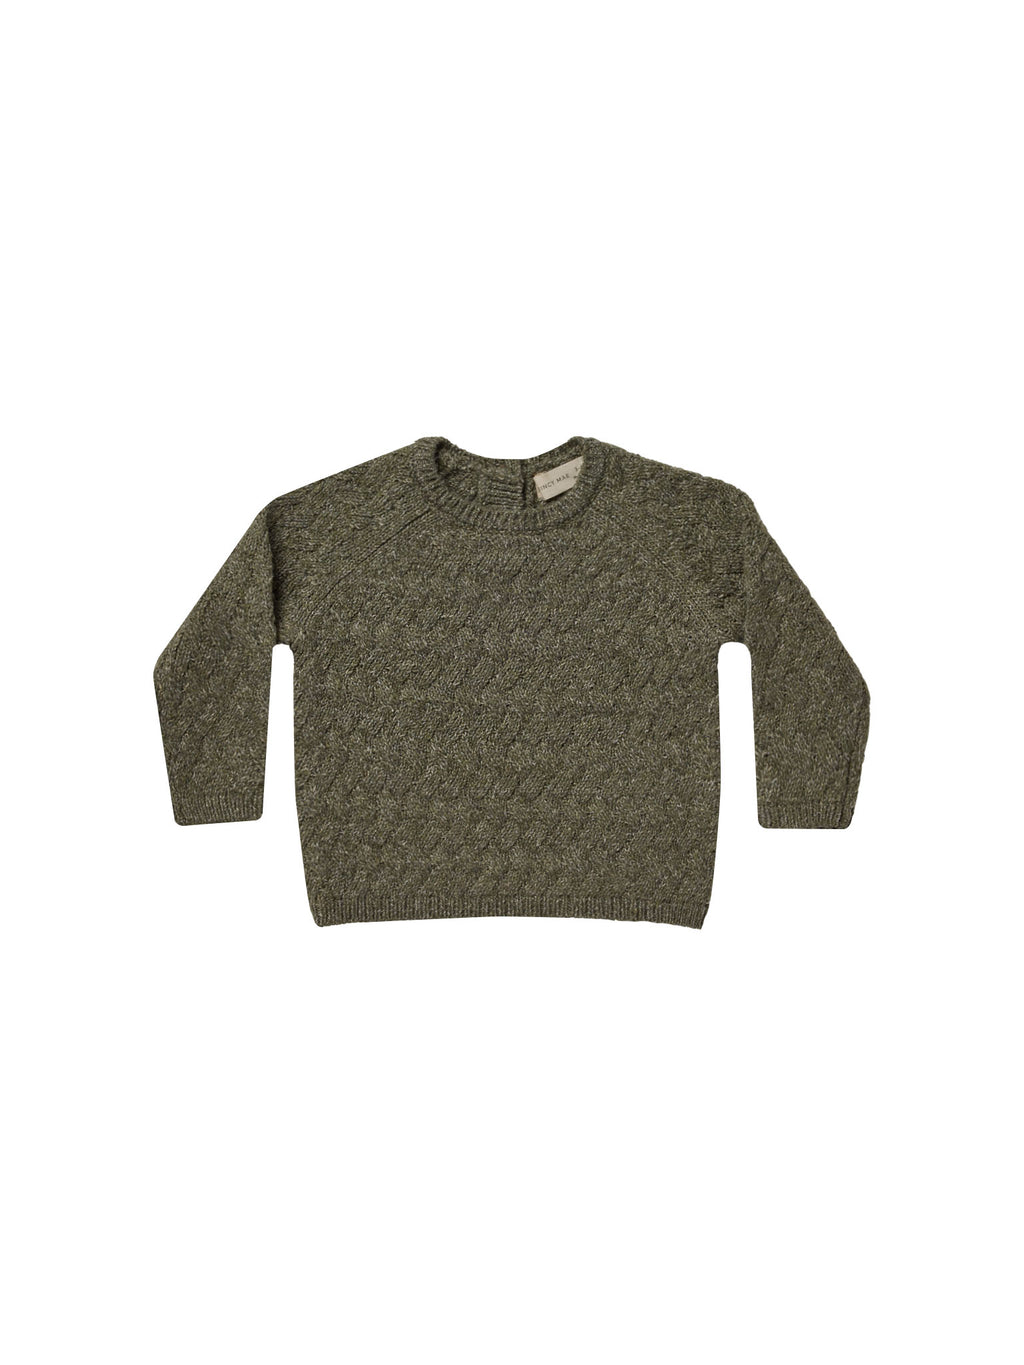 Quincy Mae Knit Sweater - Forest